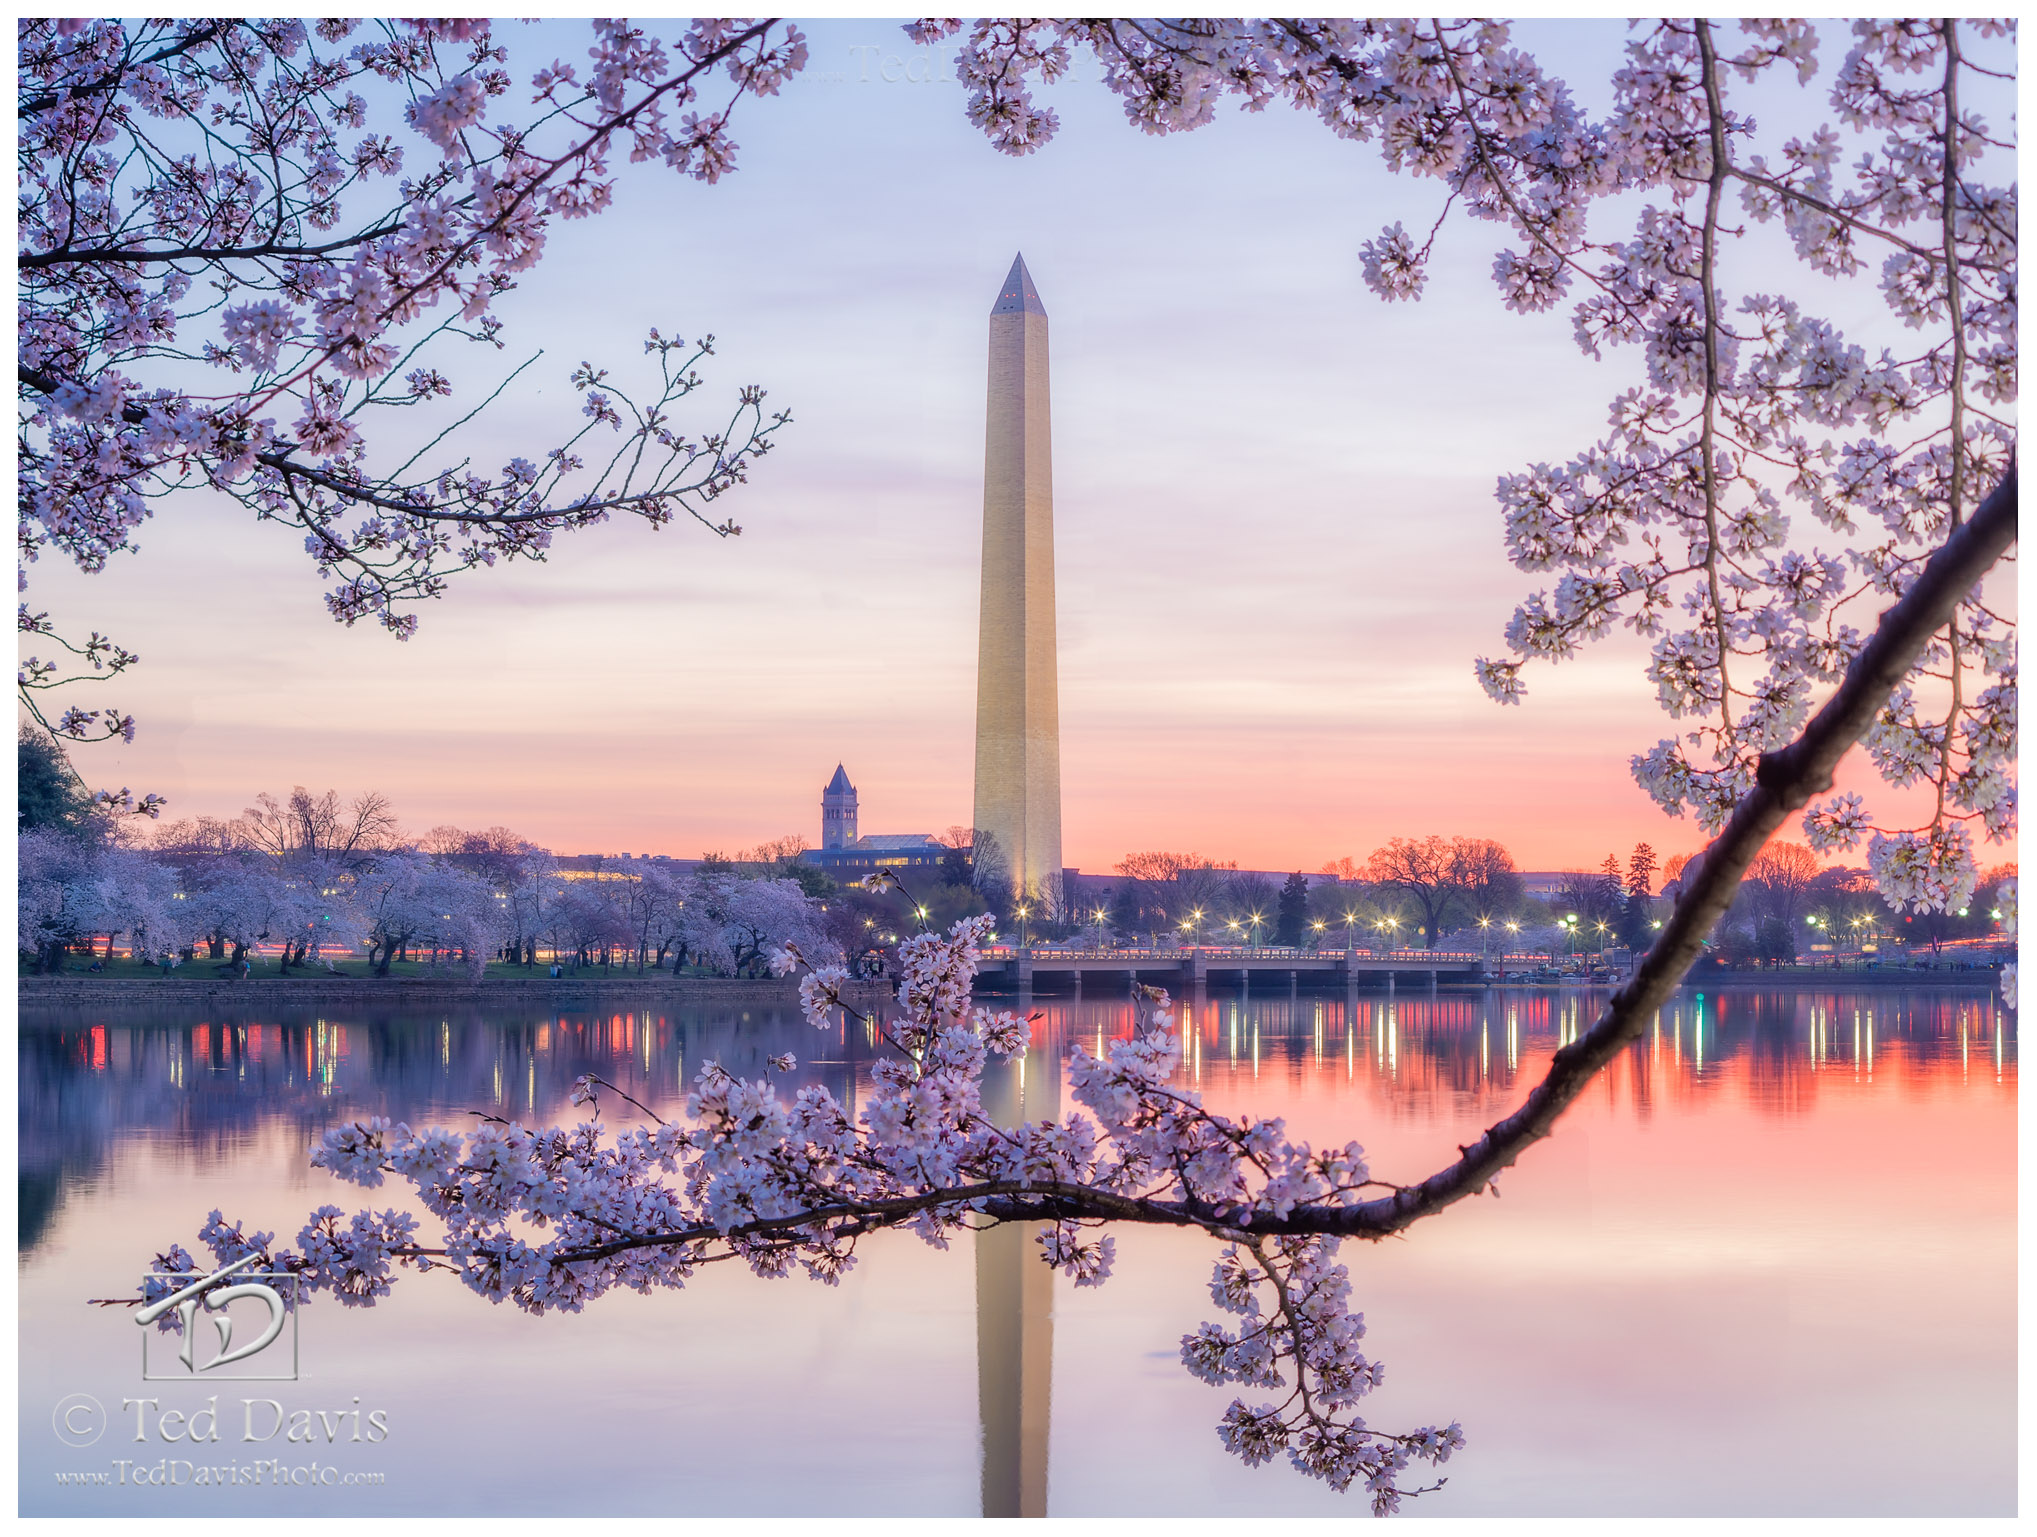 Limited Edition of 100 &nbsp;The Cherry Blossoms in Washington, DC are a marvelous sight to behold. Wispy layers of clouds hugged...